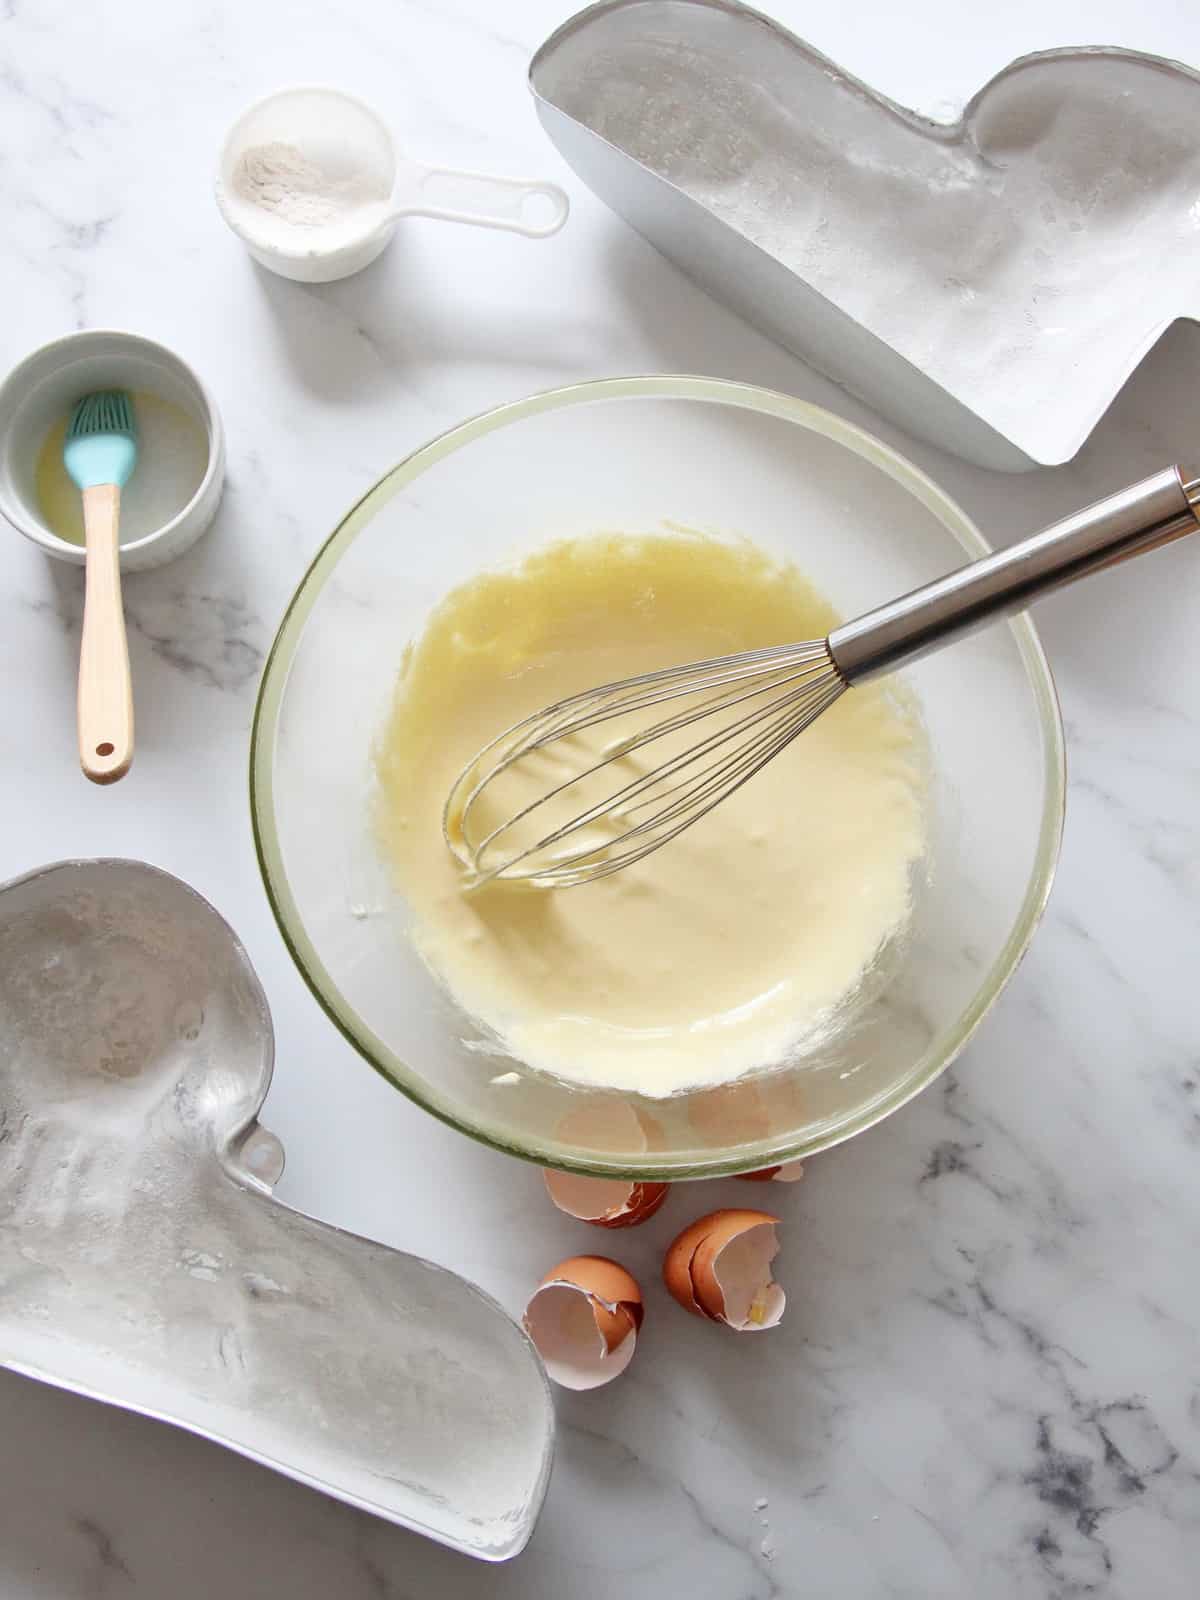 Whisked egg yolks with sugar